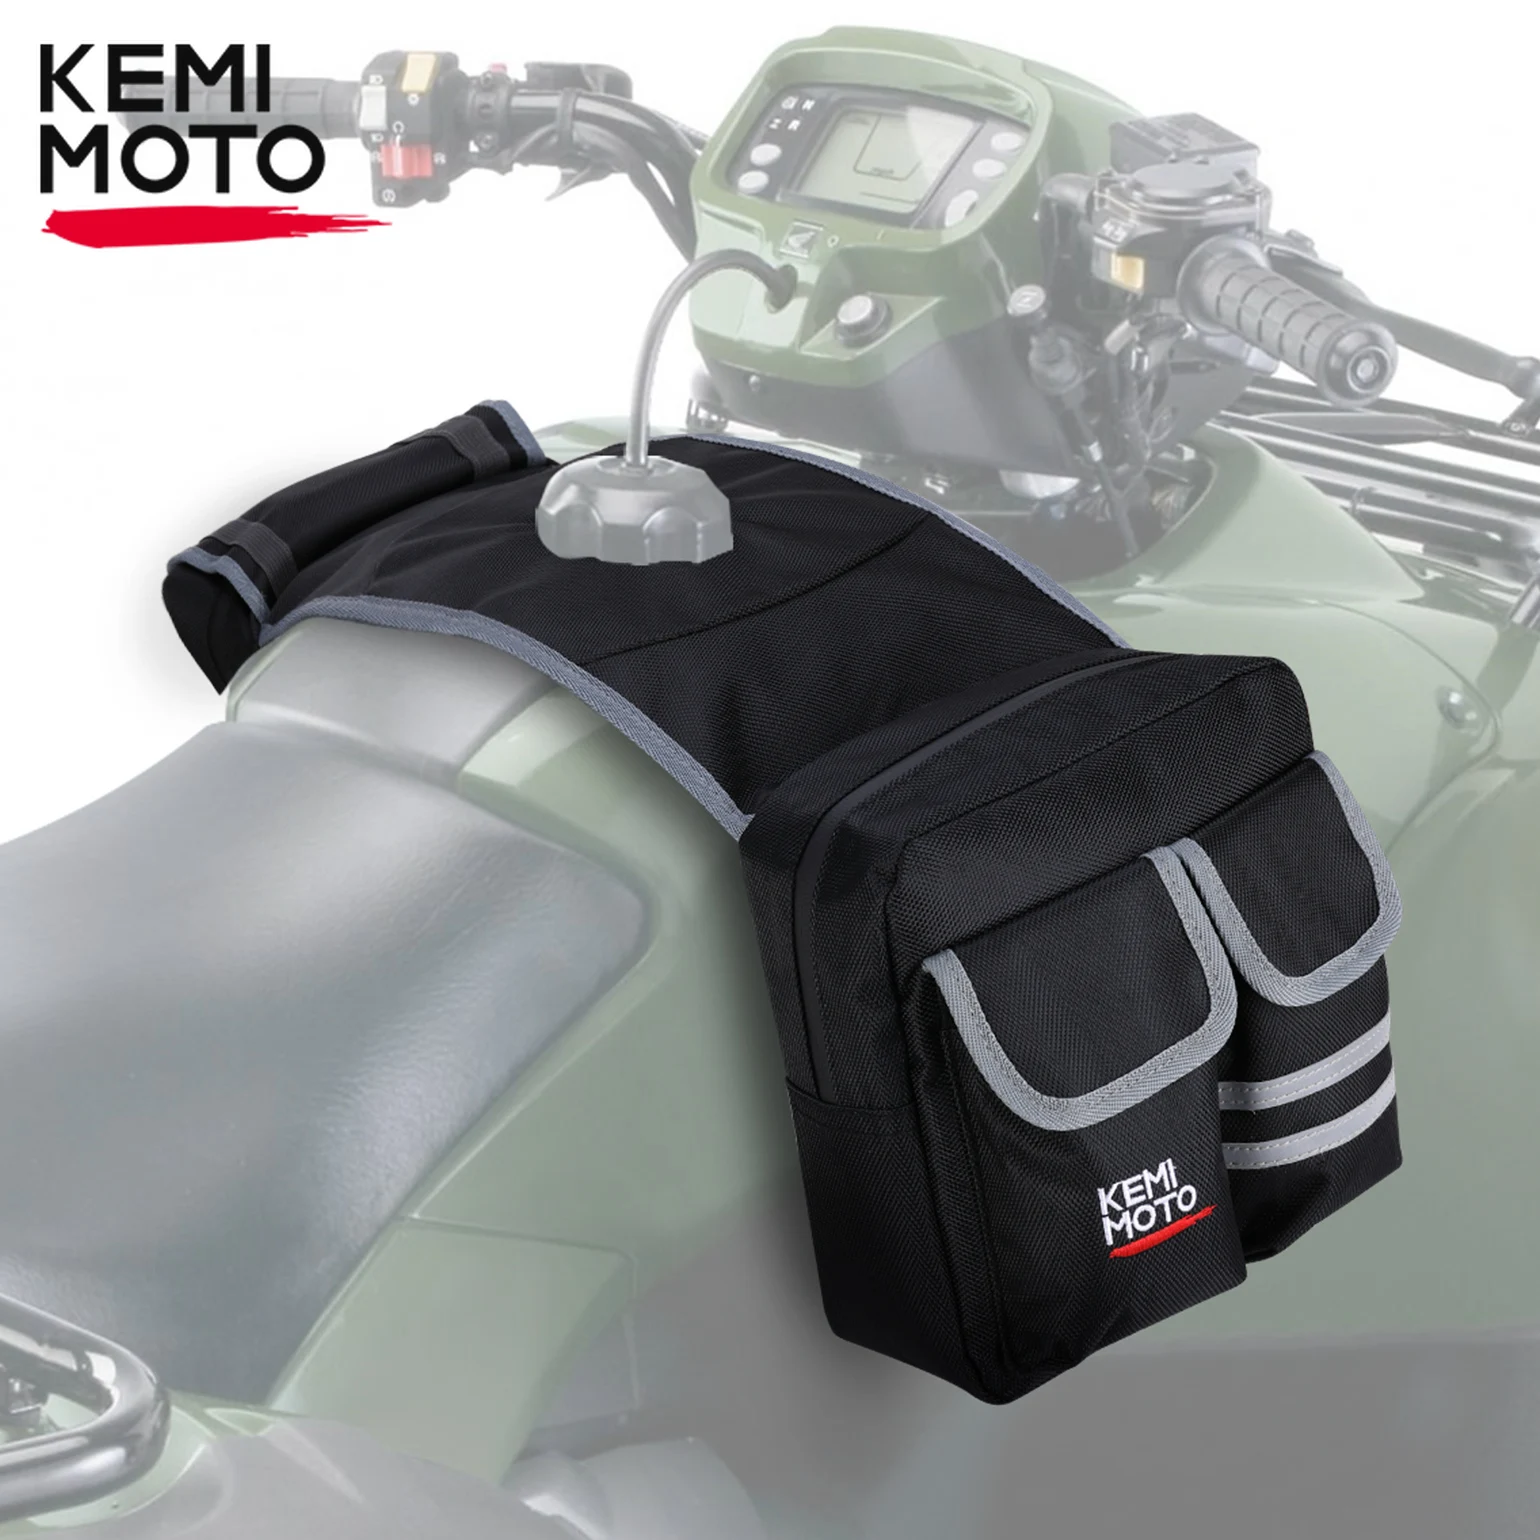 KEMIMOTO ATV Fuel Tank Bag Compatible with Polaris Sportsman XP 1000 500 800 for Can Am for Yamaha Raptor 700 700R for linhai kemimoto led drl turn signal lights switch set compatible with yamaha raptor 700 700r yfz450 yfz450r wolverine 450 350 2006 2023